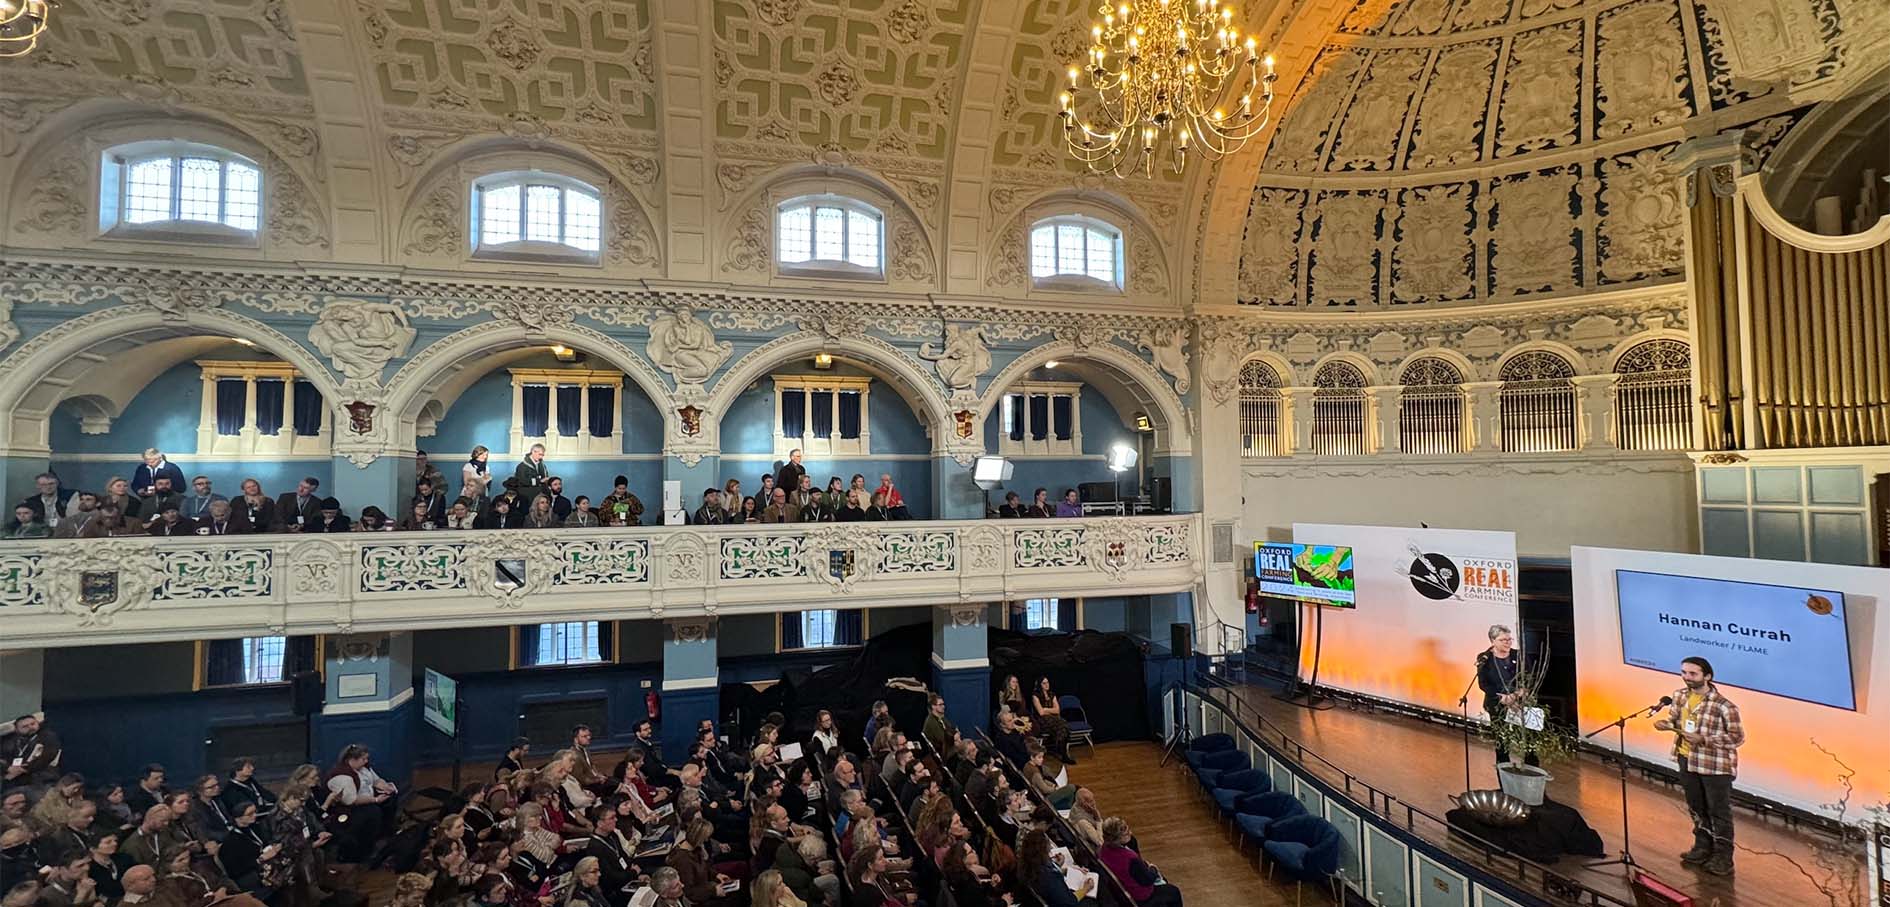 A balcony view of a conference in action, inside a pretty town hall